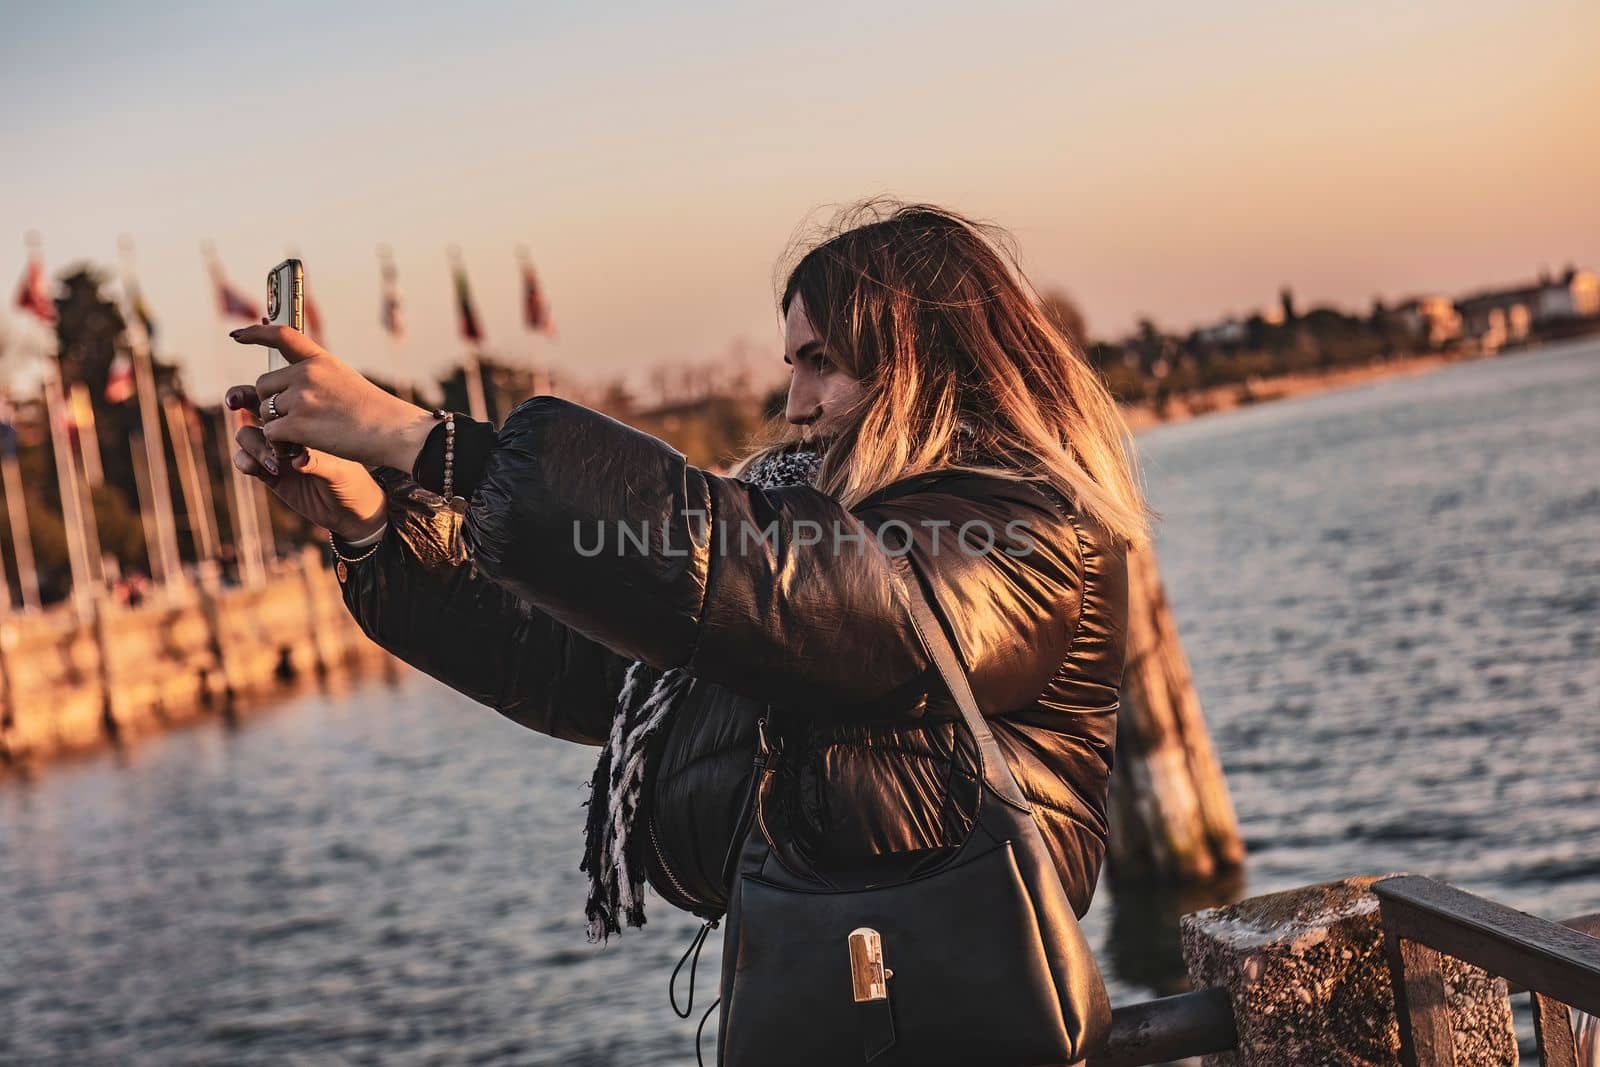 Sirmione, Italy 15 February 2023: A young woman takes a selfie on the pier, capturing the beautiful sunset behind her. She looks happy and content in this scenic moment